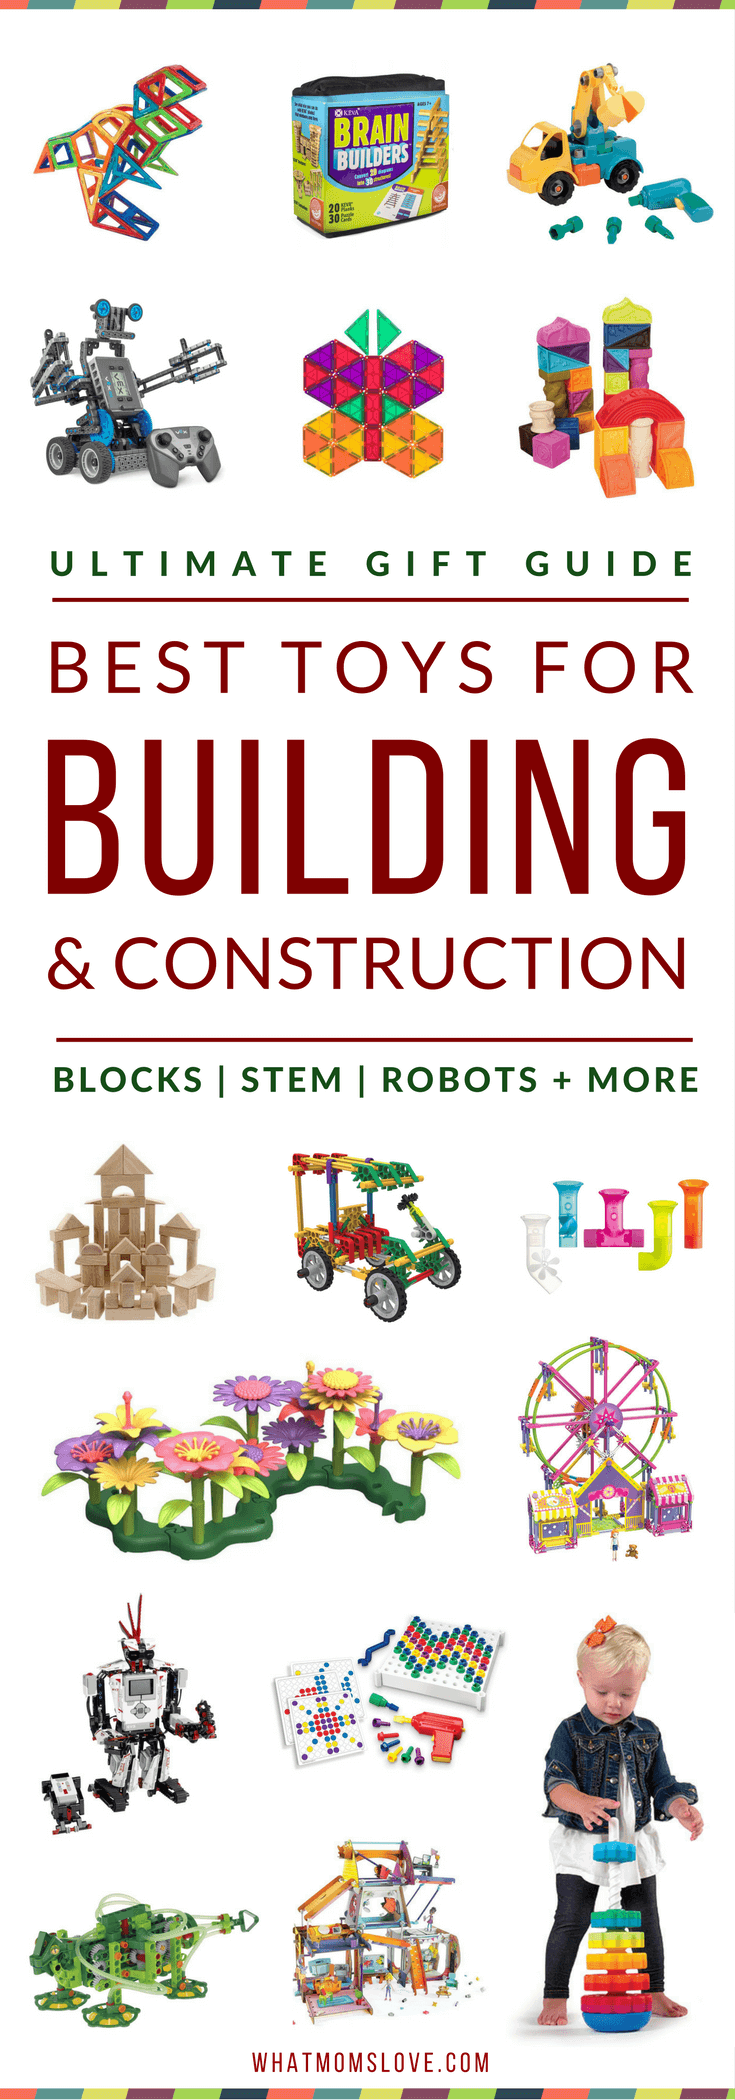 Best Building Toys For Kids | Gift Ideas For Kids Who Like To Build & Put Things Together | Best STEM Toys For Kids